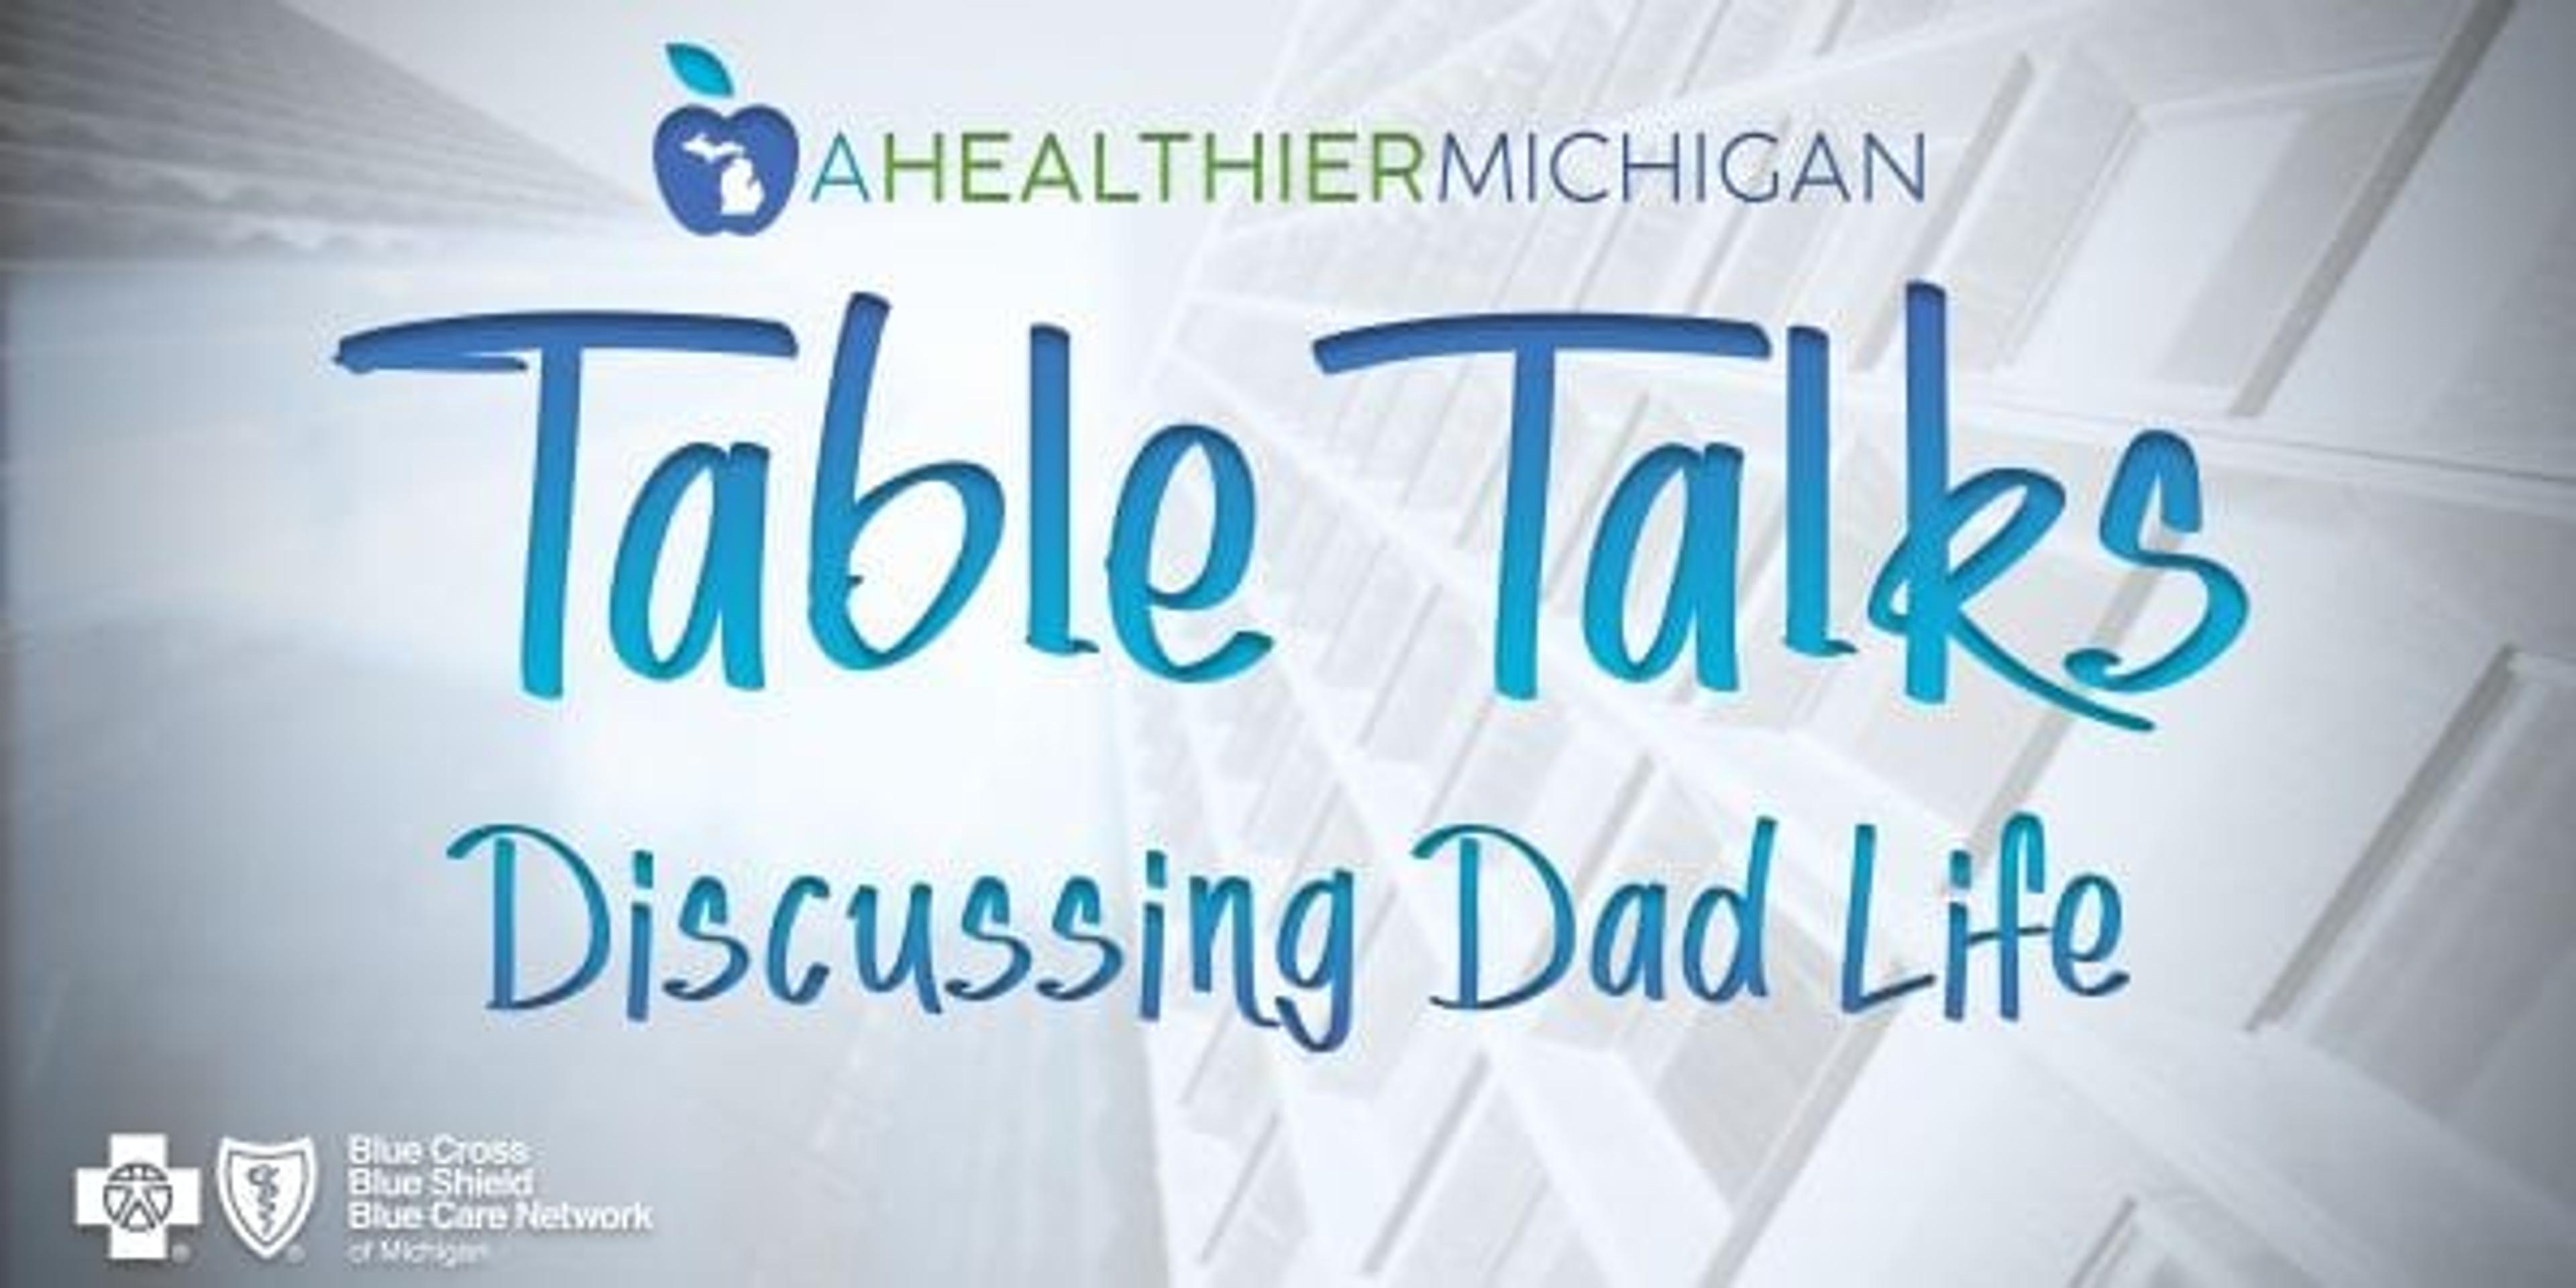 A Healthier Michigan Table Talks Discussing Dad Life